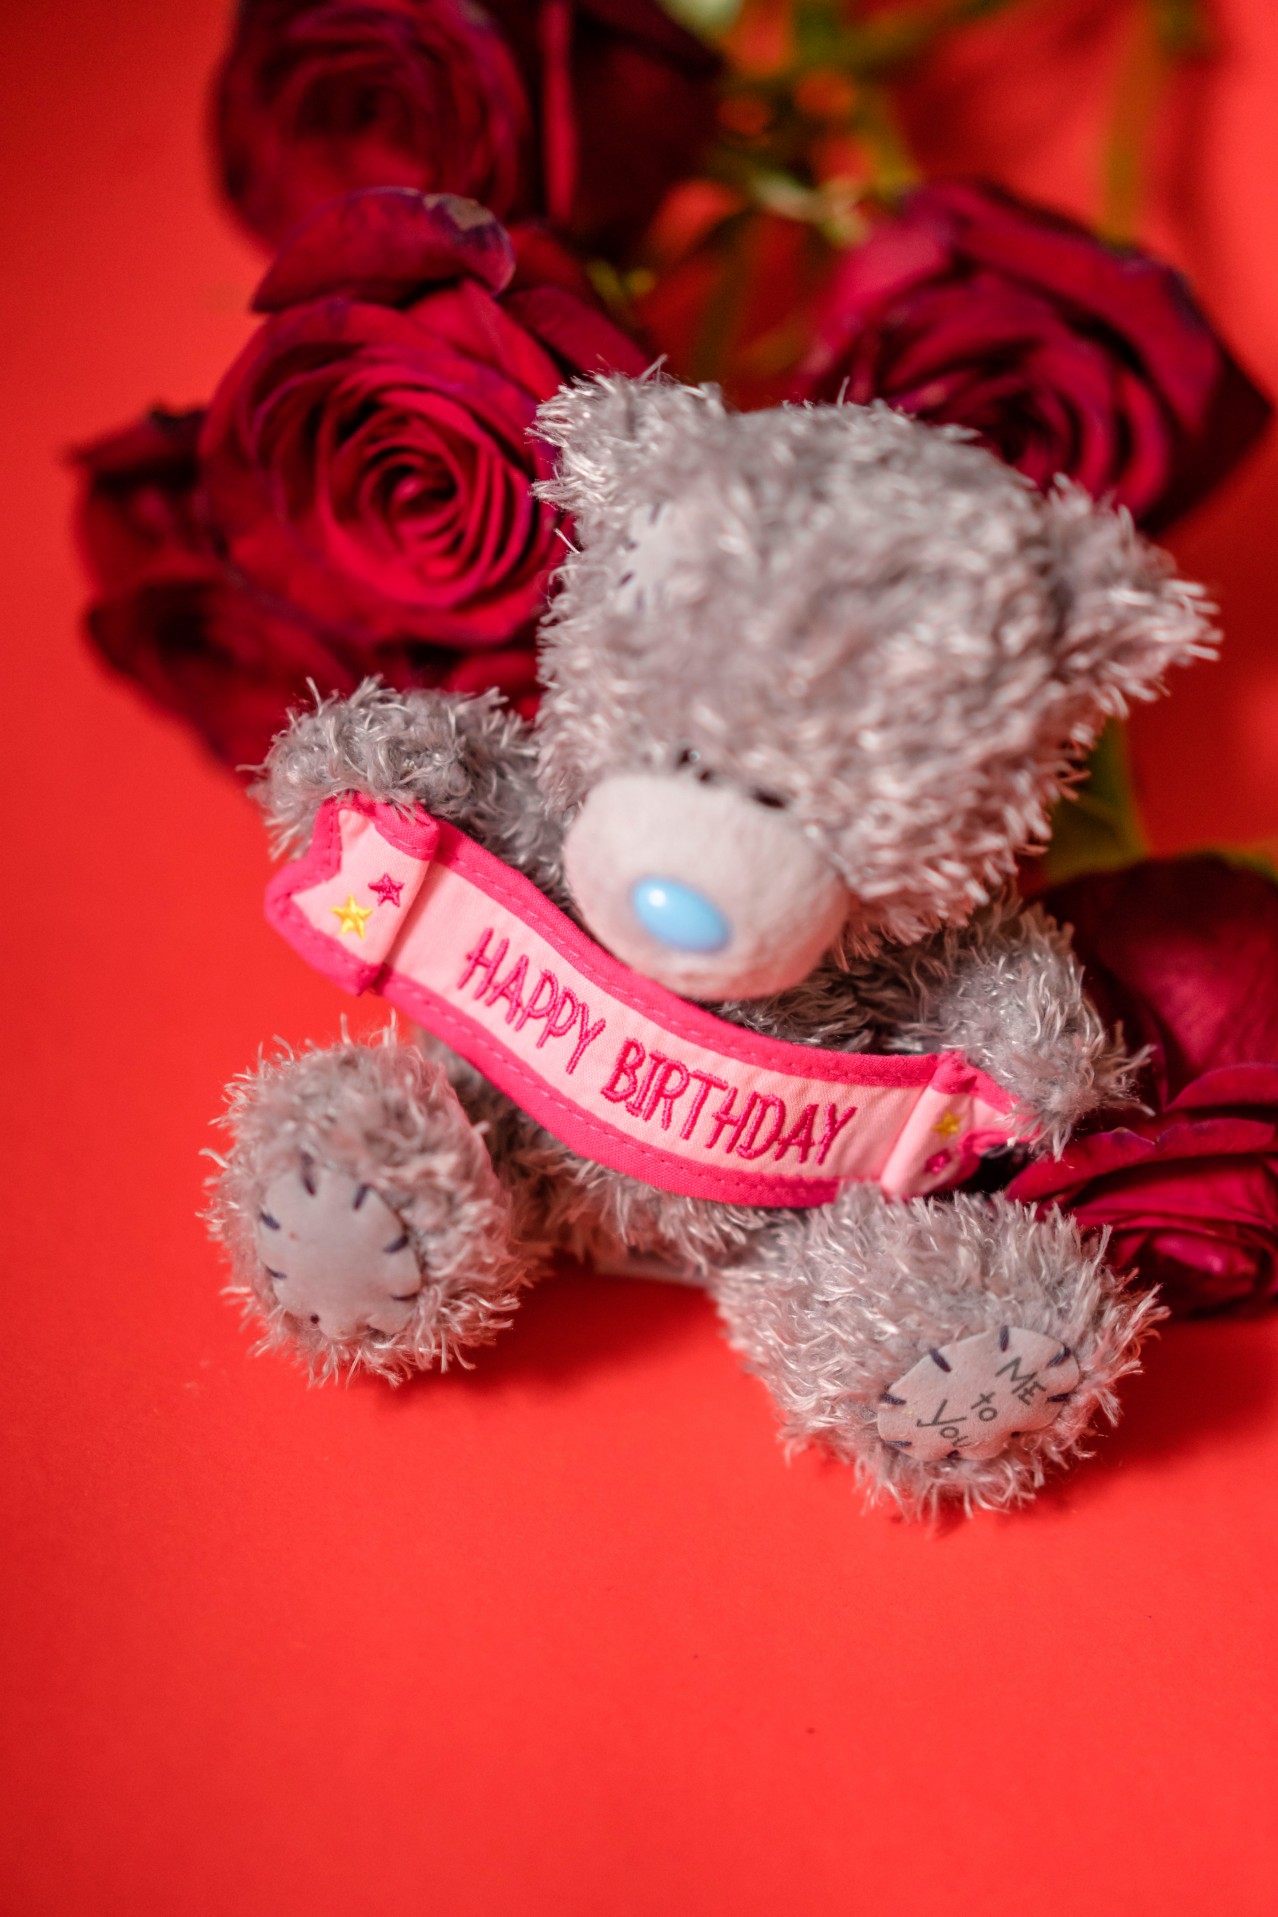 Cute Teddy Bear and rose bouquet on red background